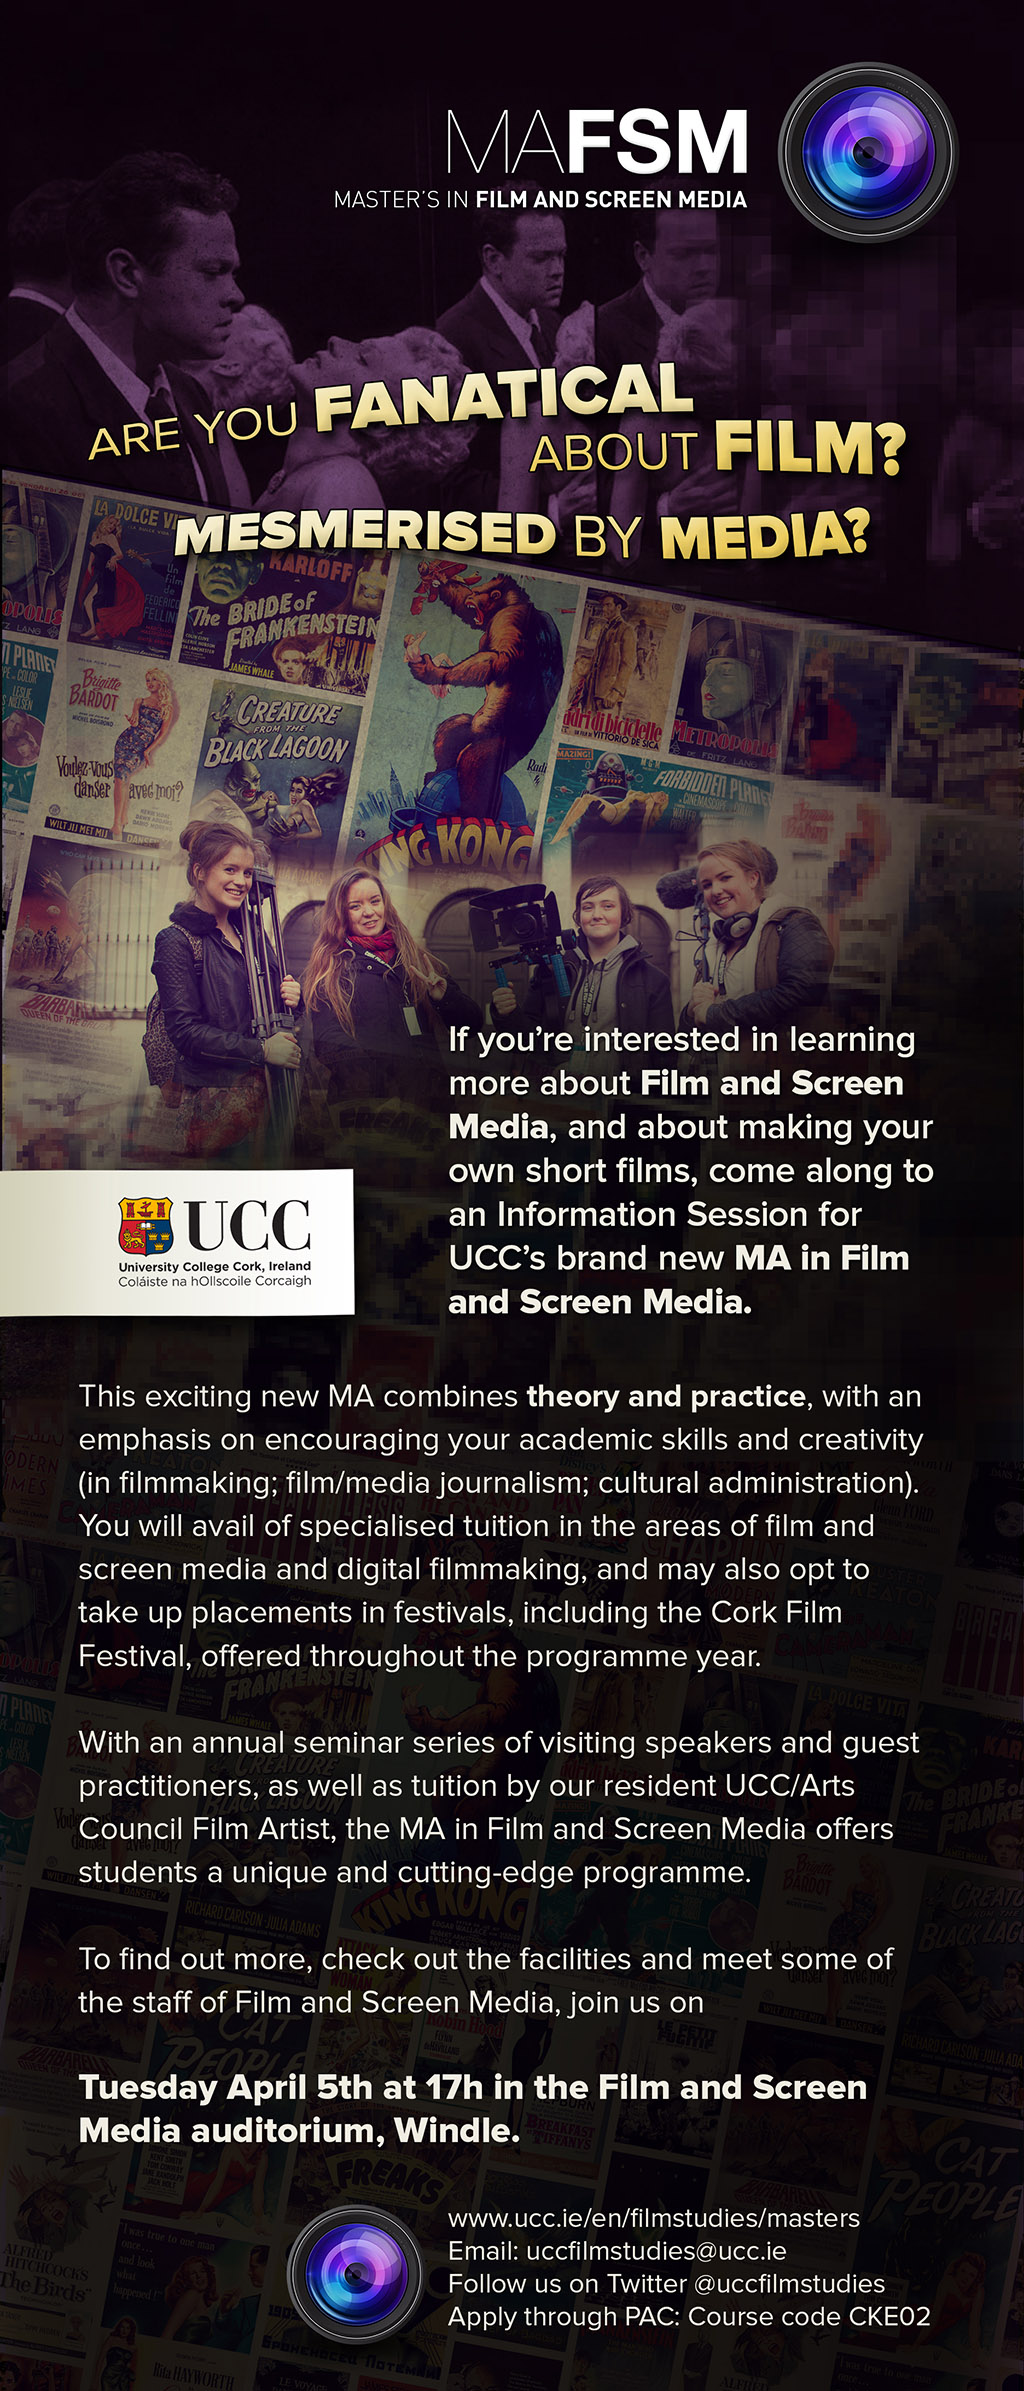 Information Session Tuesday 5th April, 5pm. Film & Screen Media Auditorium, Windle.